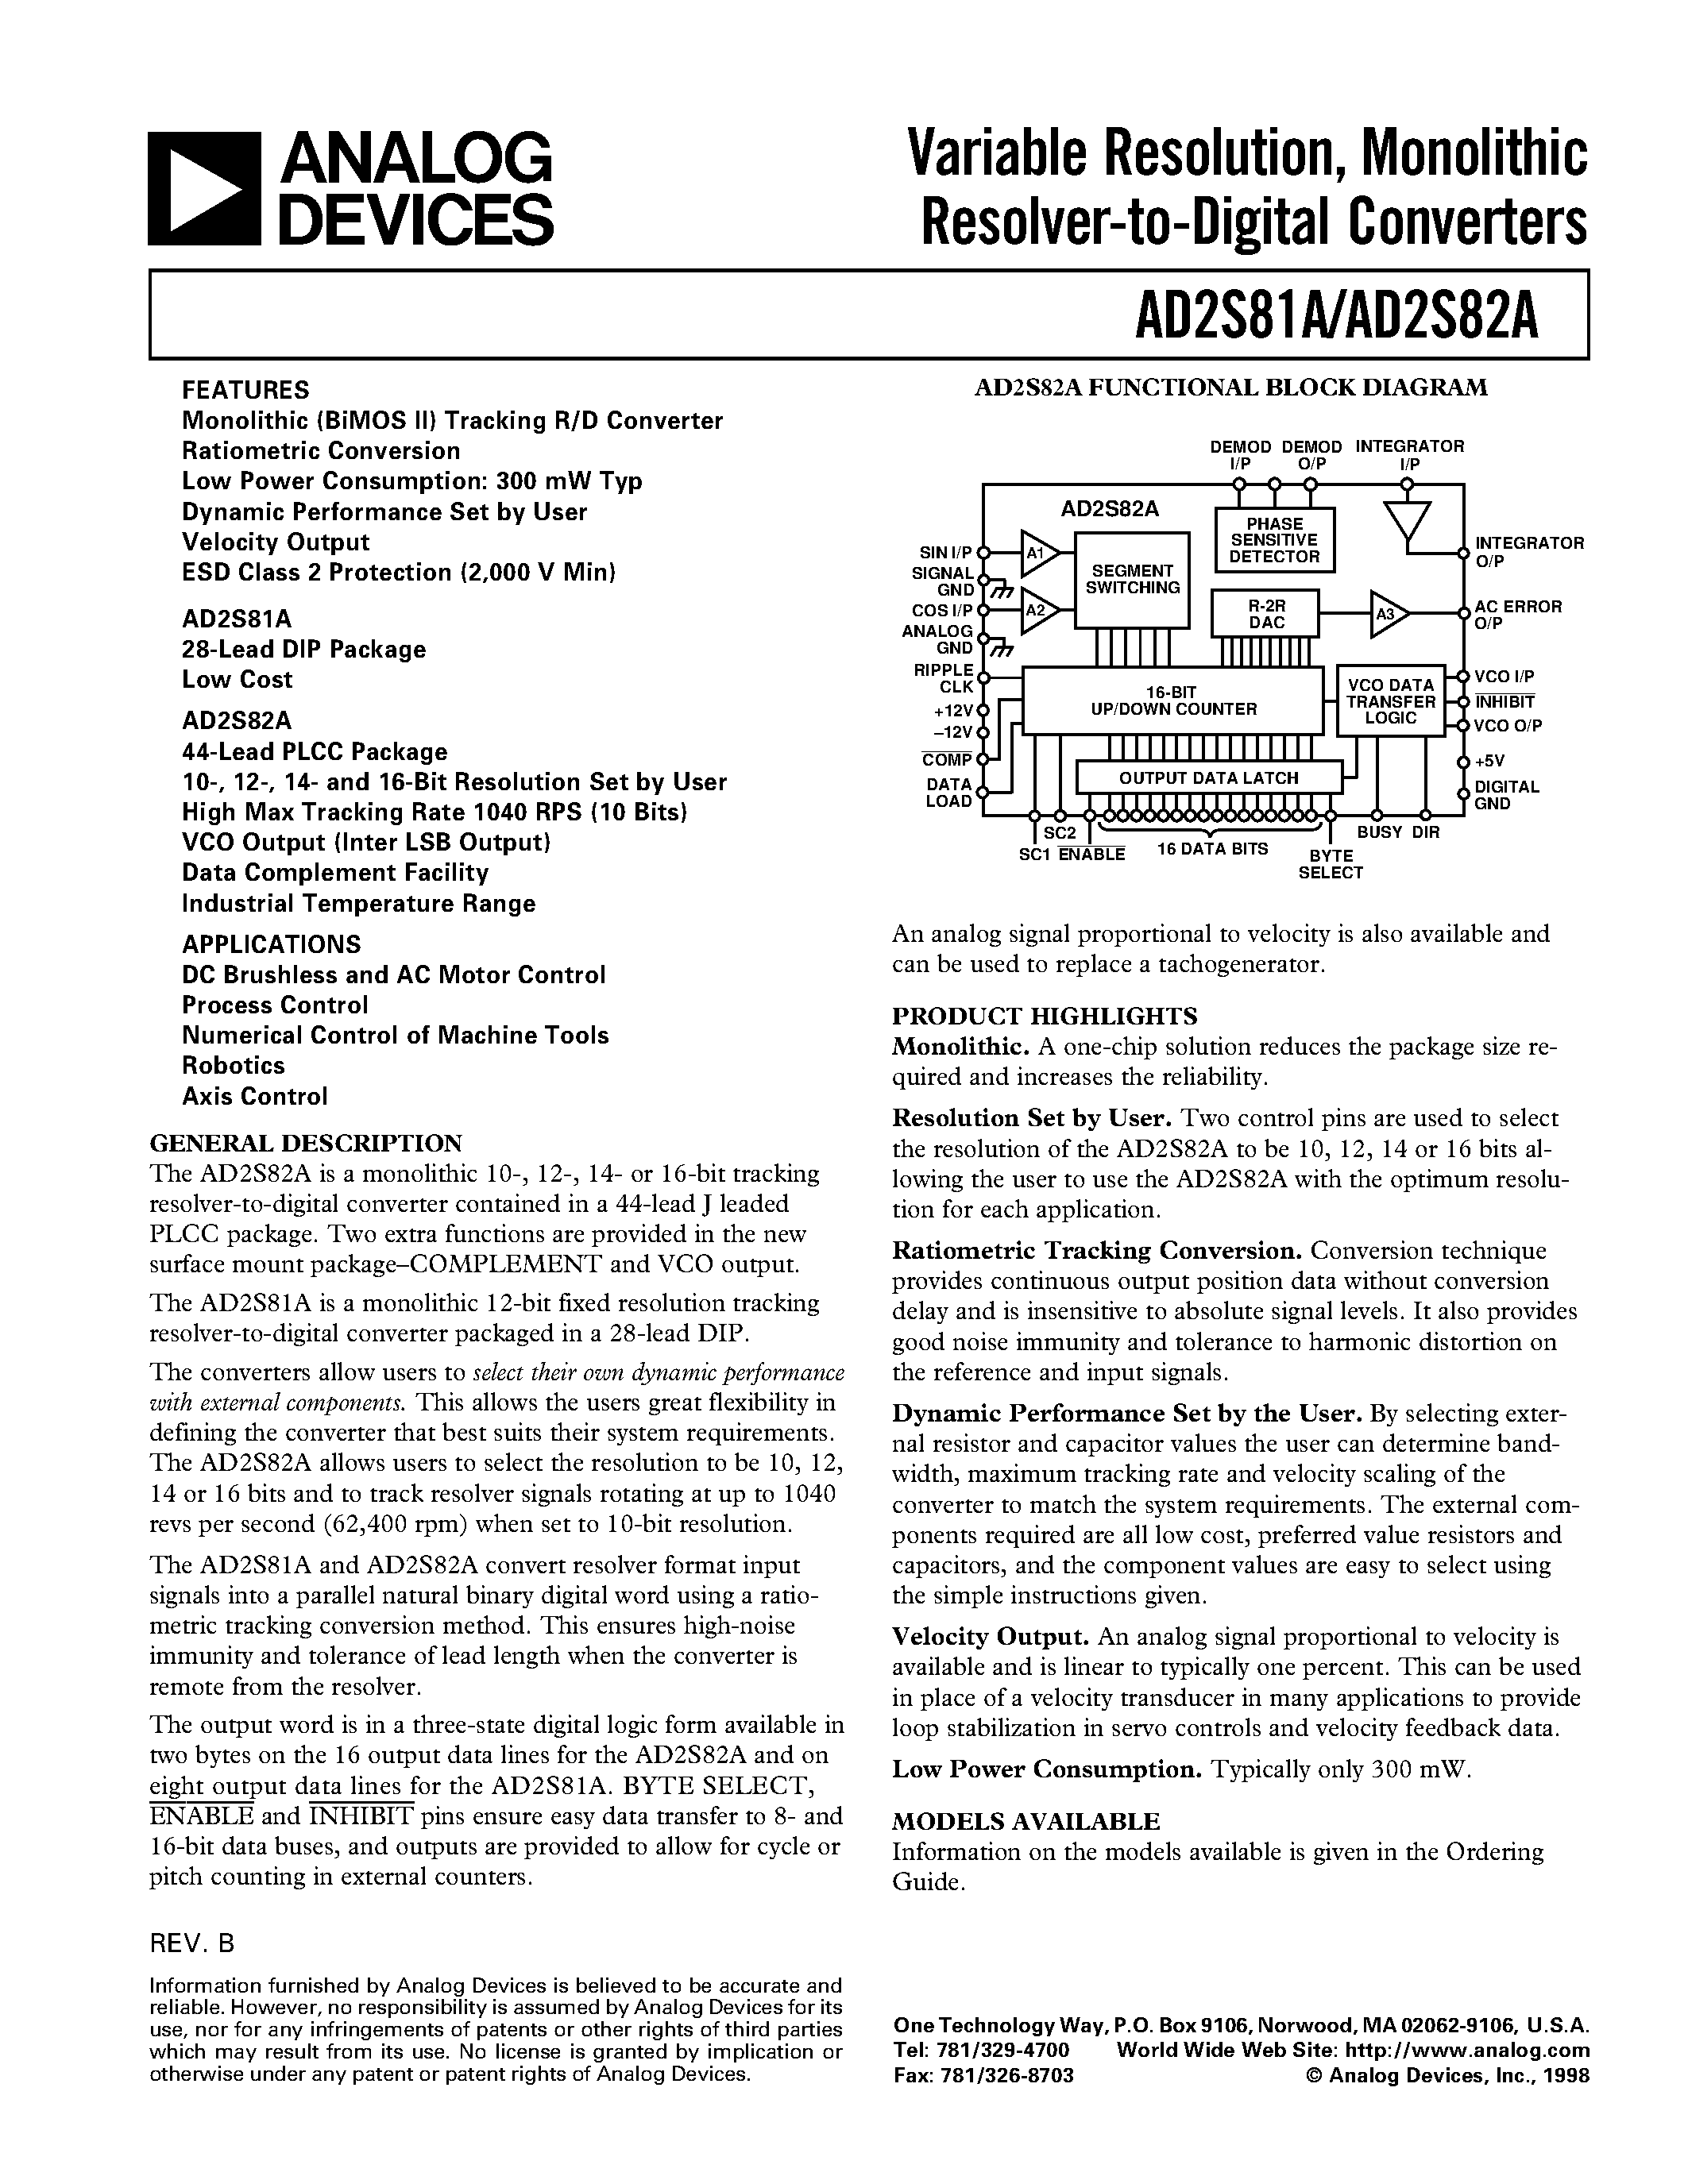 Даташит AD2S82AJP - Variable Resolution/ Monolithic Resolver-to-Digital Converters страница 1